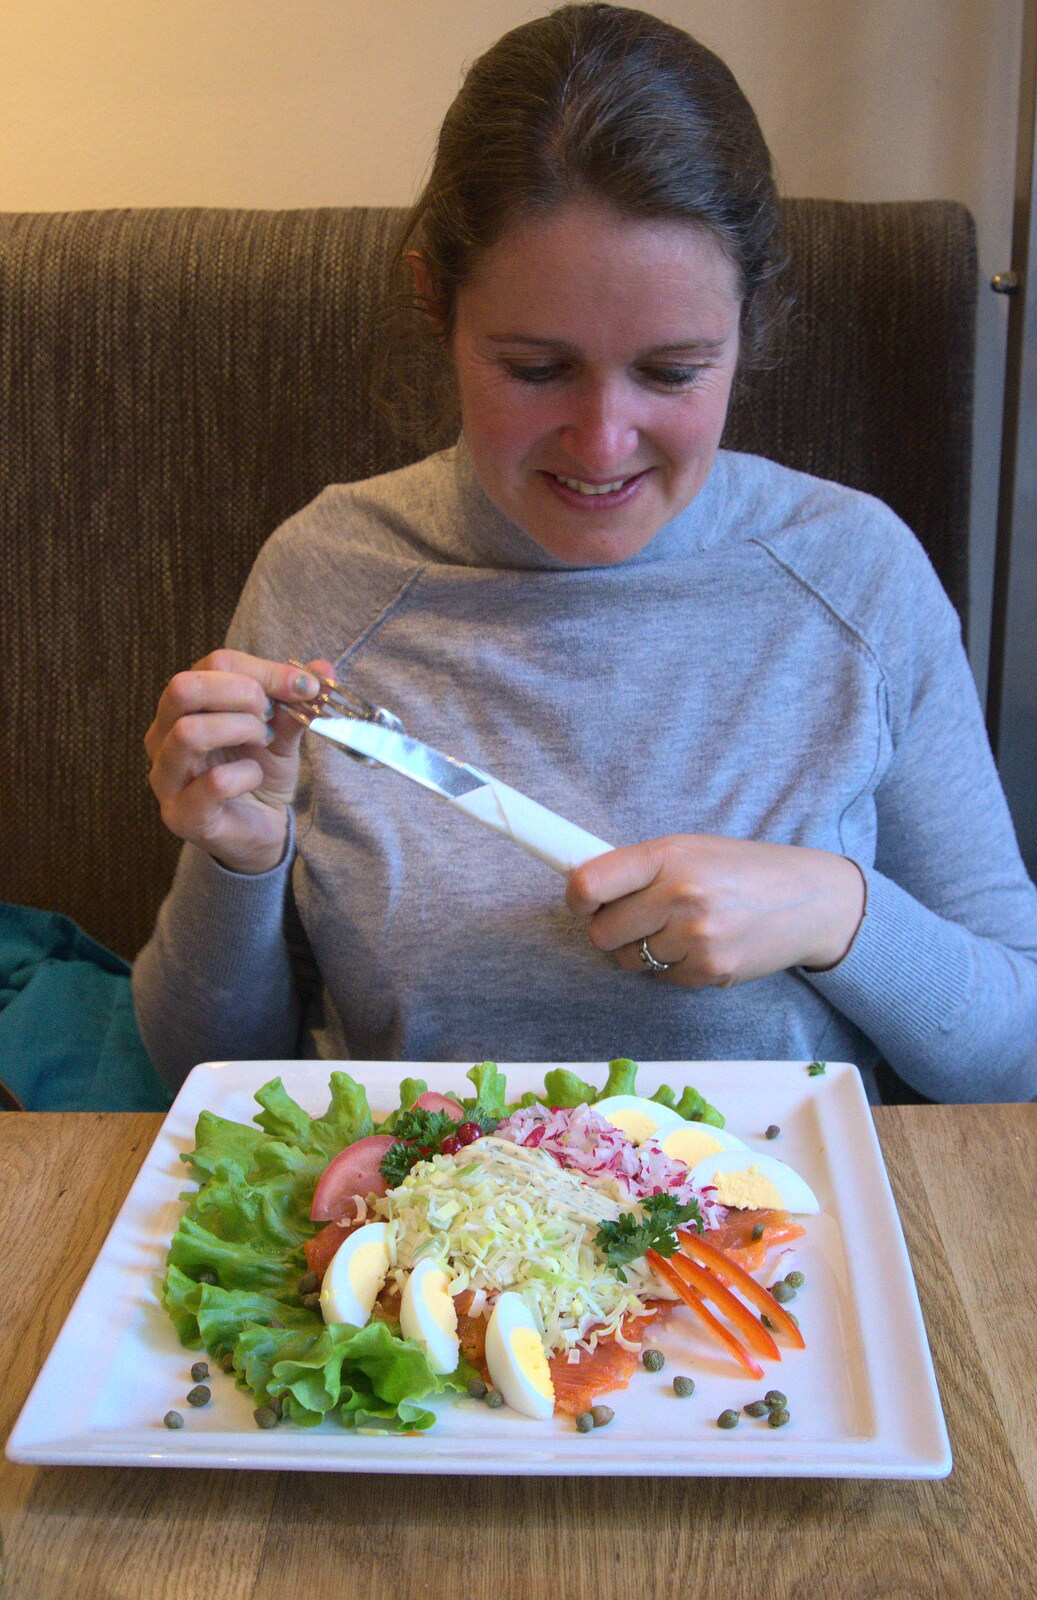 Isobel contemplates her £15 open sandwich from A Trip to Reykjavik, Iceland - 20th April 2017